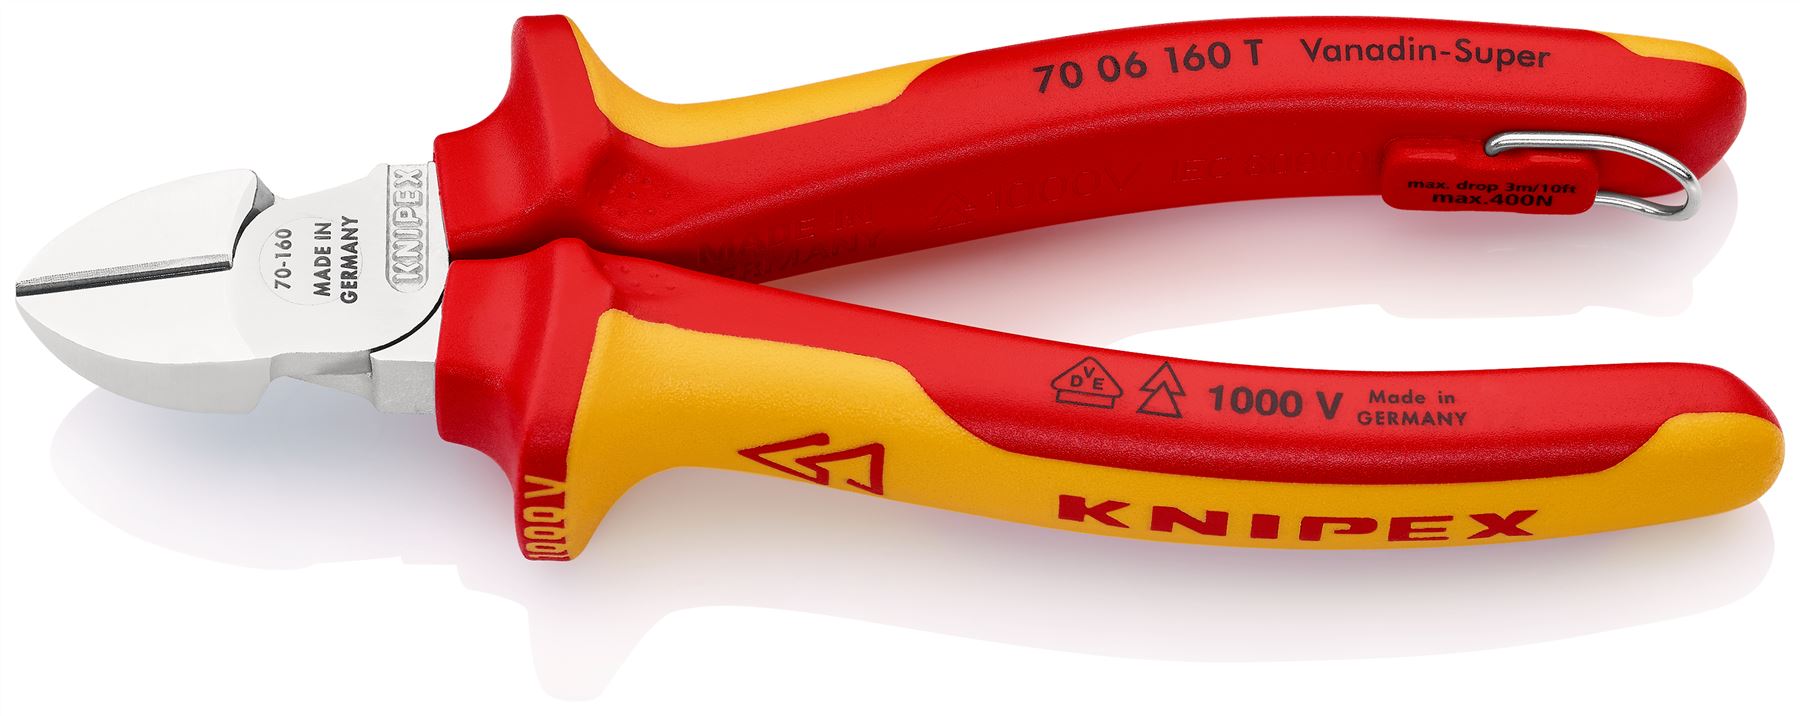 KNIPEX Diagonal Cutting Pliers Side Cutters 160mm VDE Multi Component Grips Tether Point 70 06 160 T BK